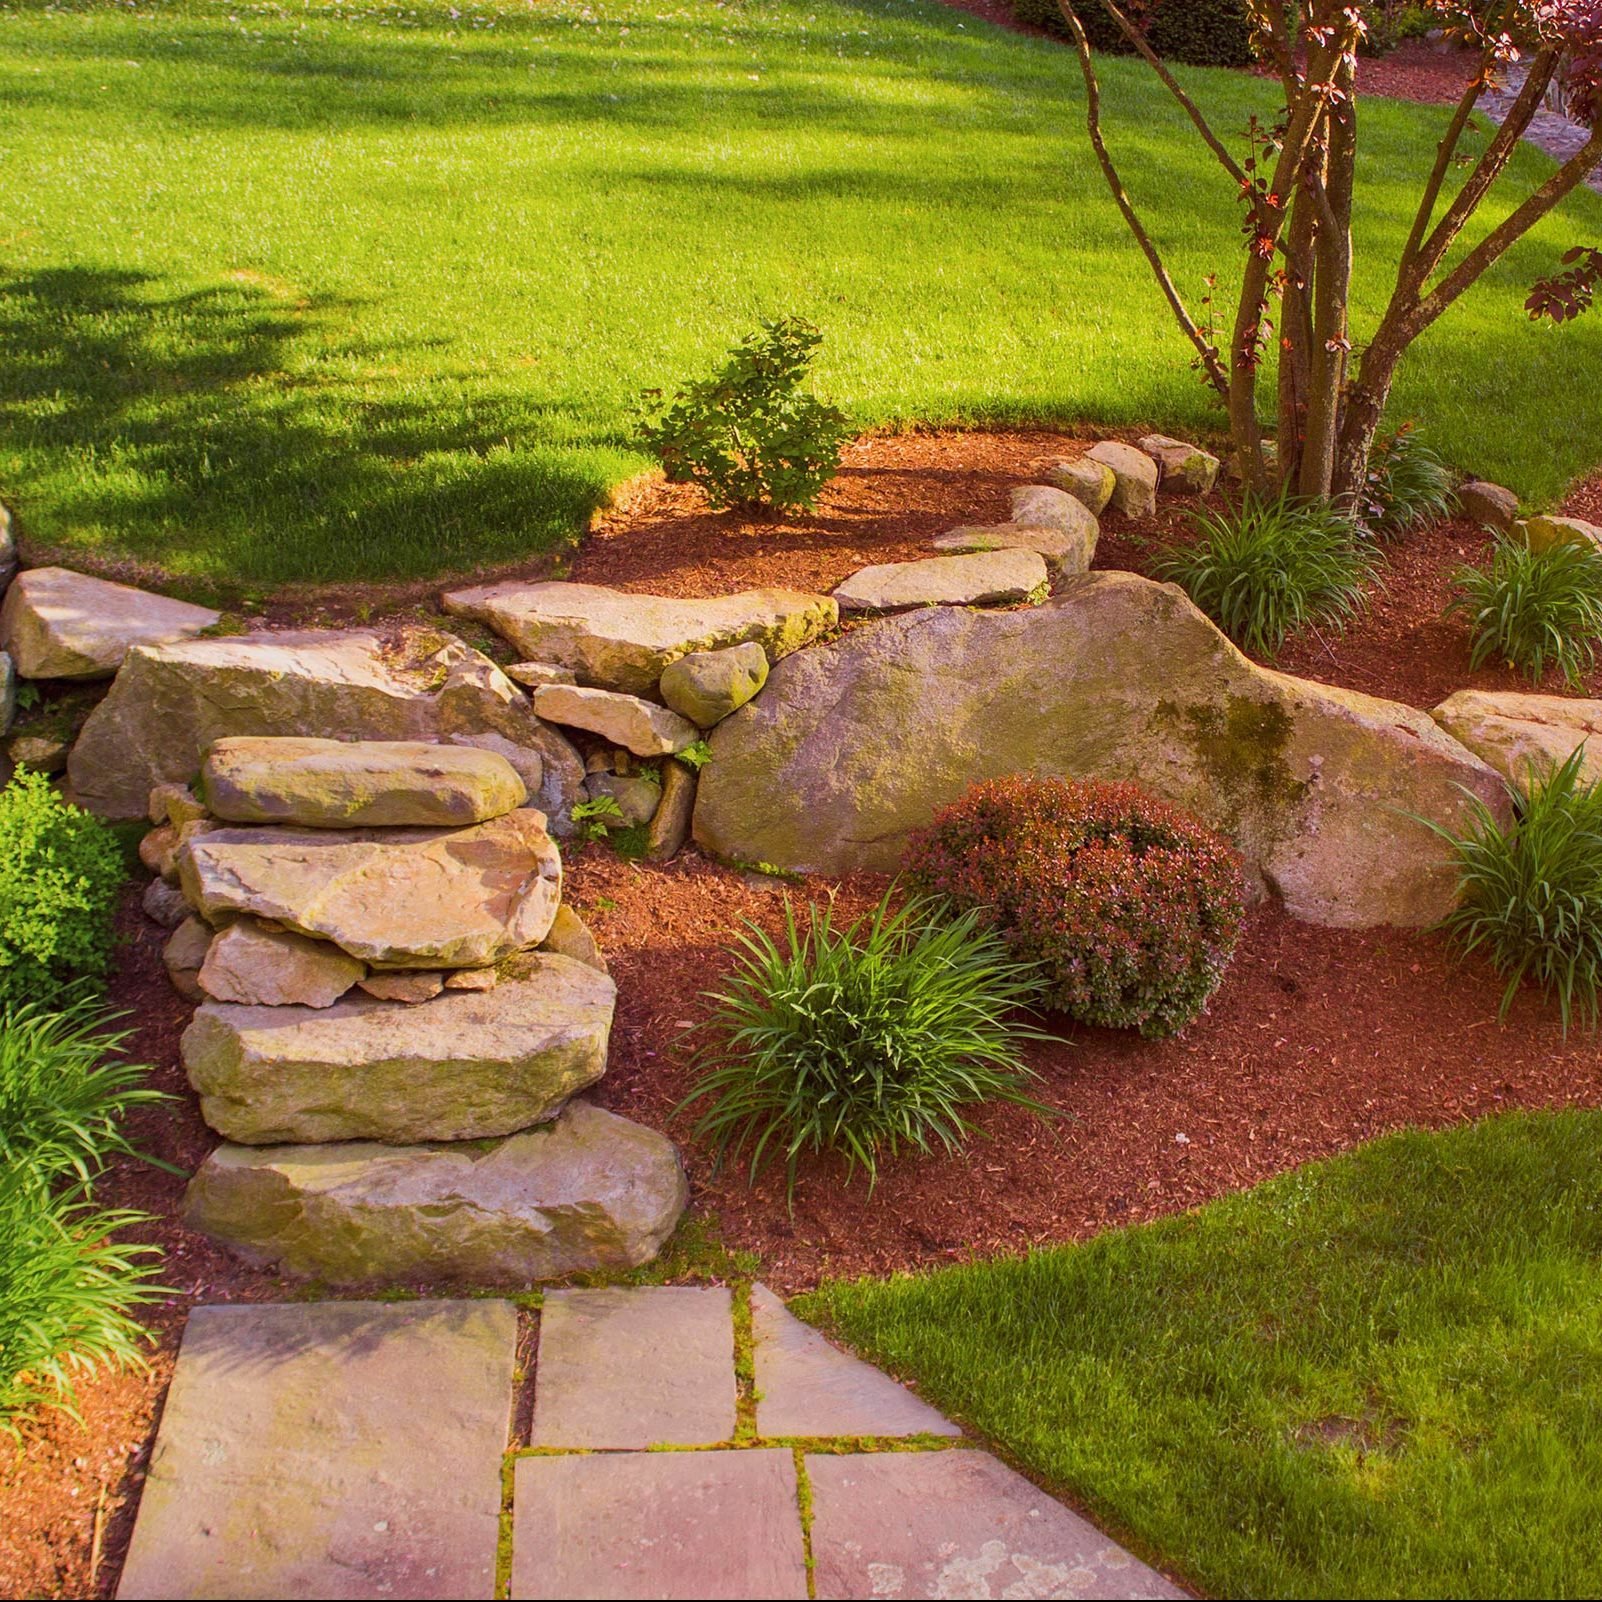 18 Things Your Landscaper Won’t Tell You | The Family Handyman